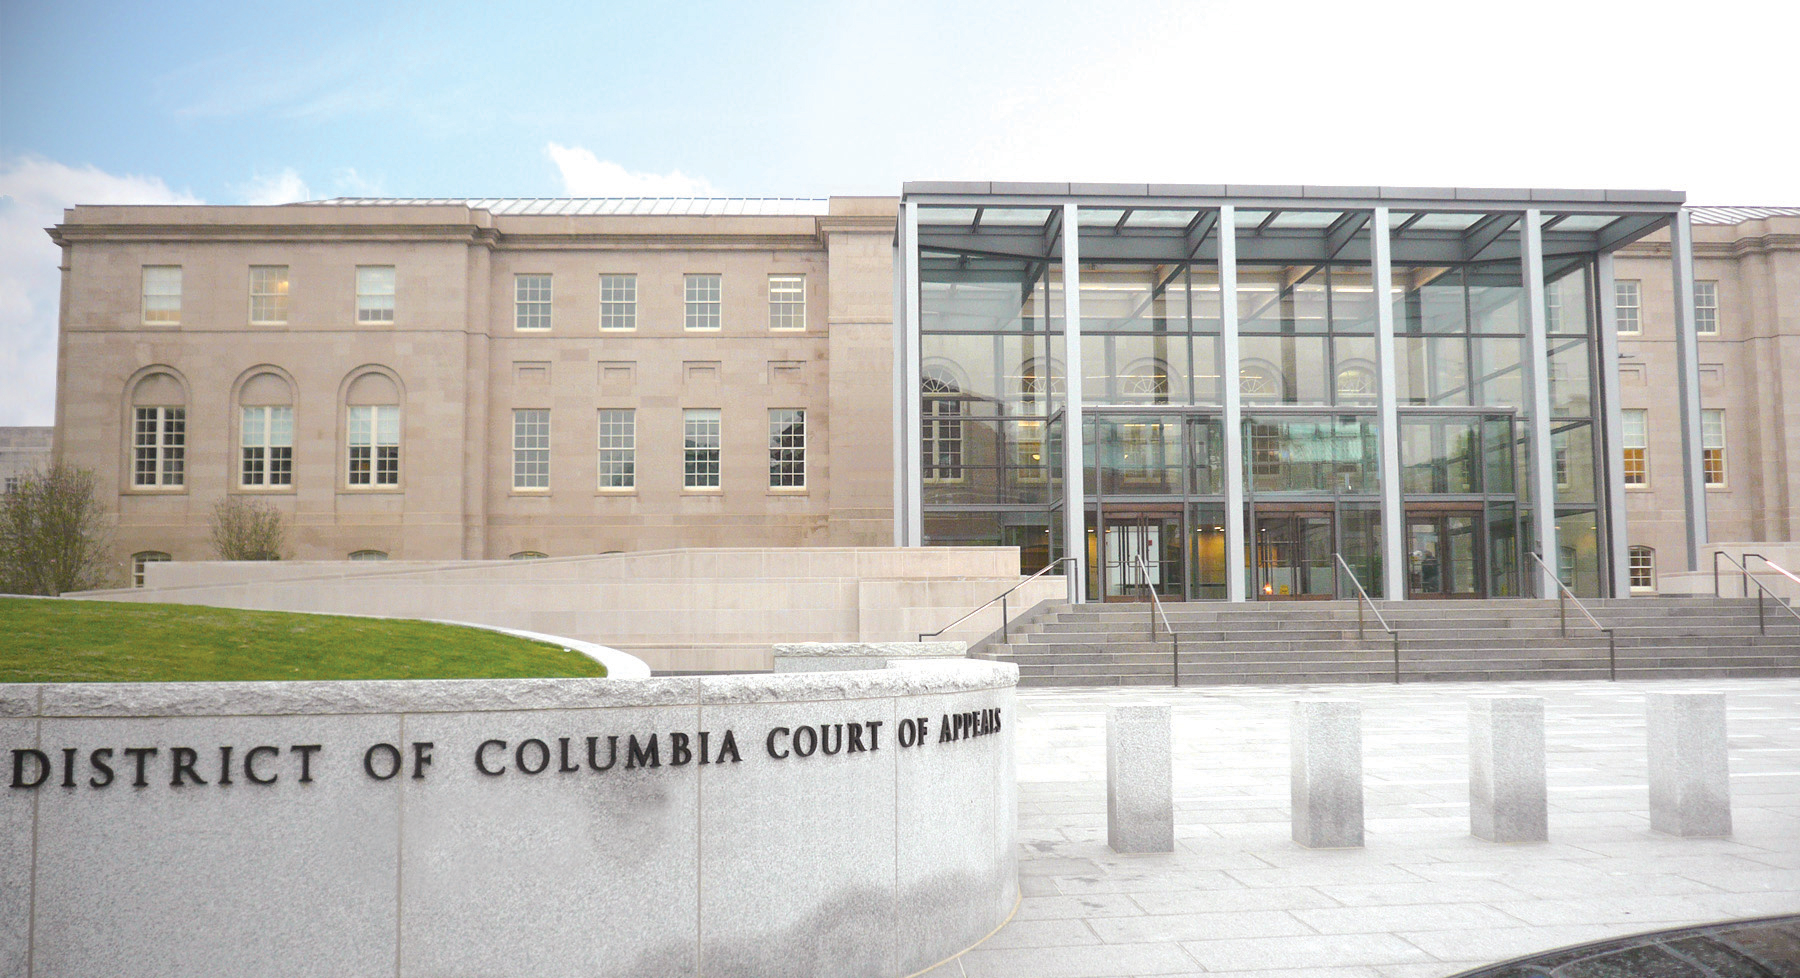 Historic Courthouse District of Columbia Courts